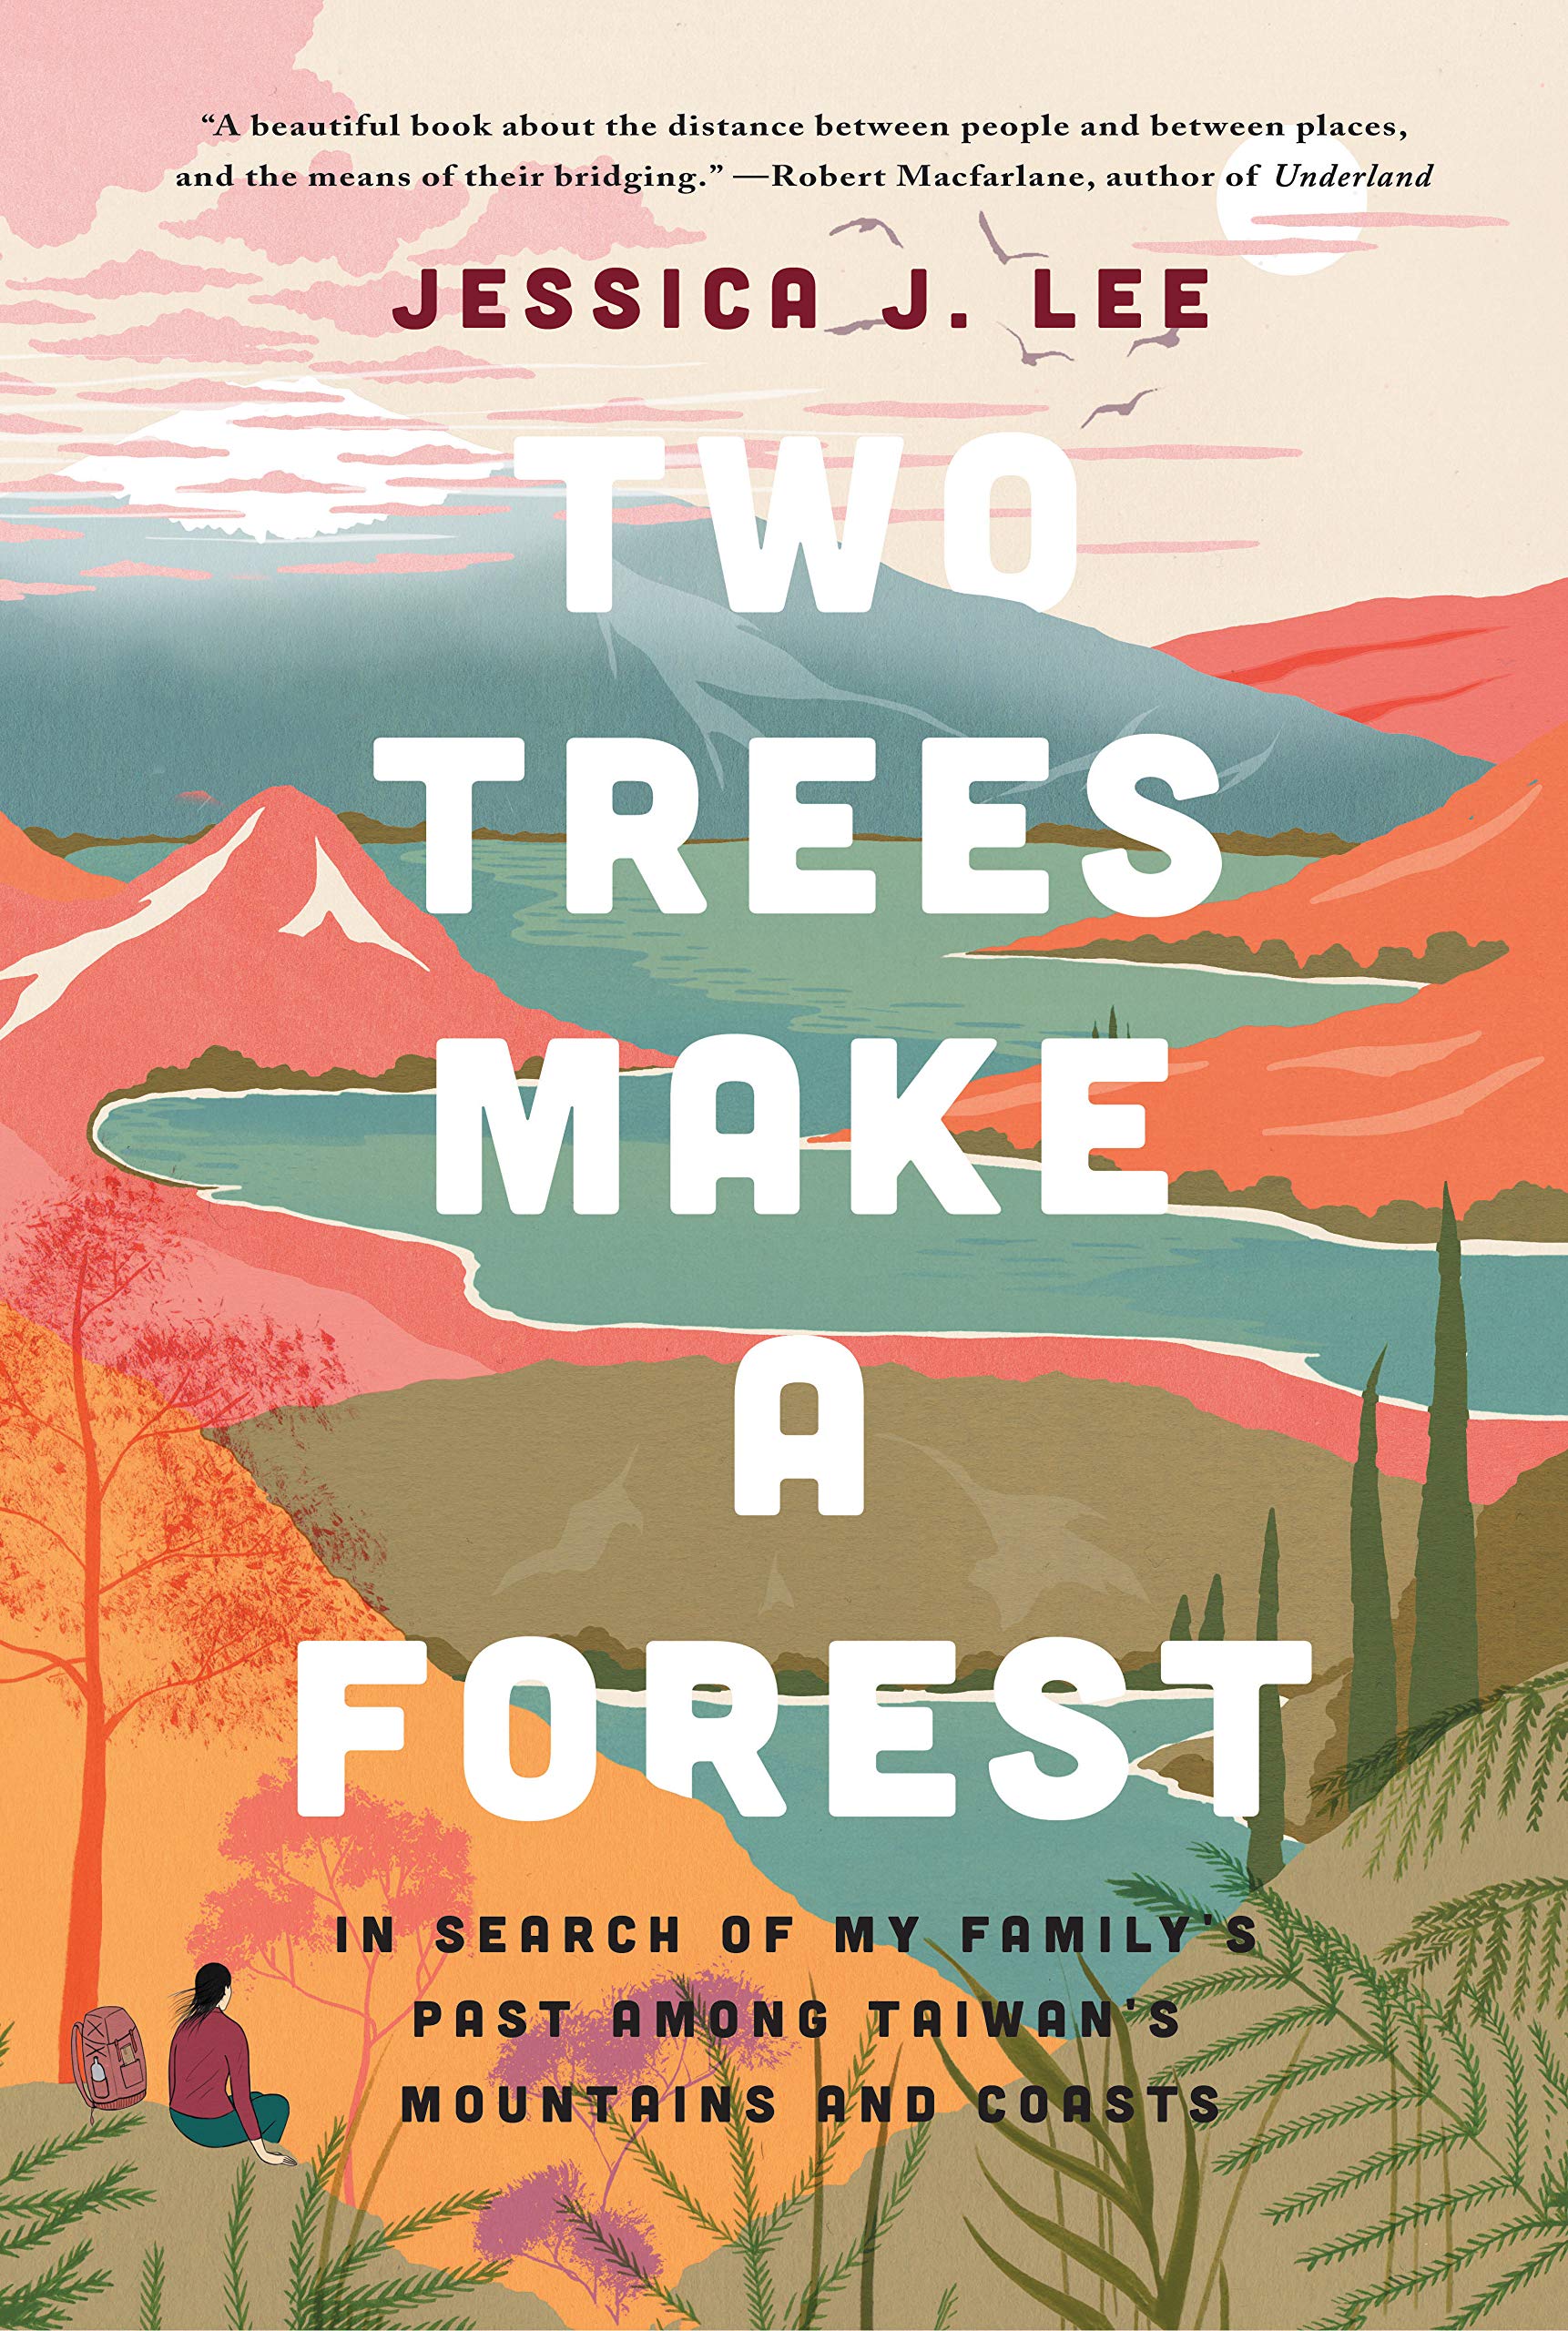 Two Trees Make a Forest: Travels Among Taiwan's Mountains and Coasts in Search of My Family's Past